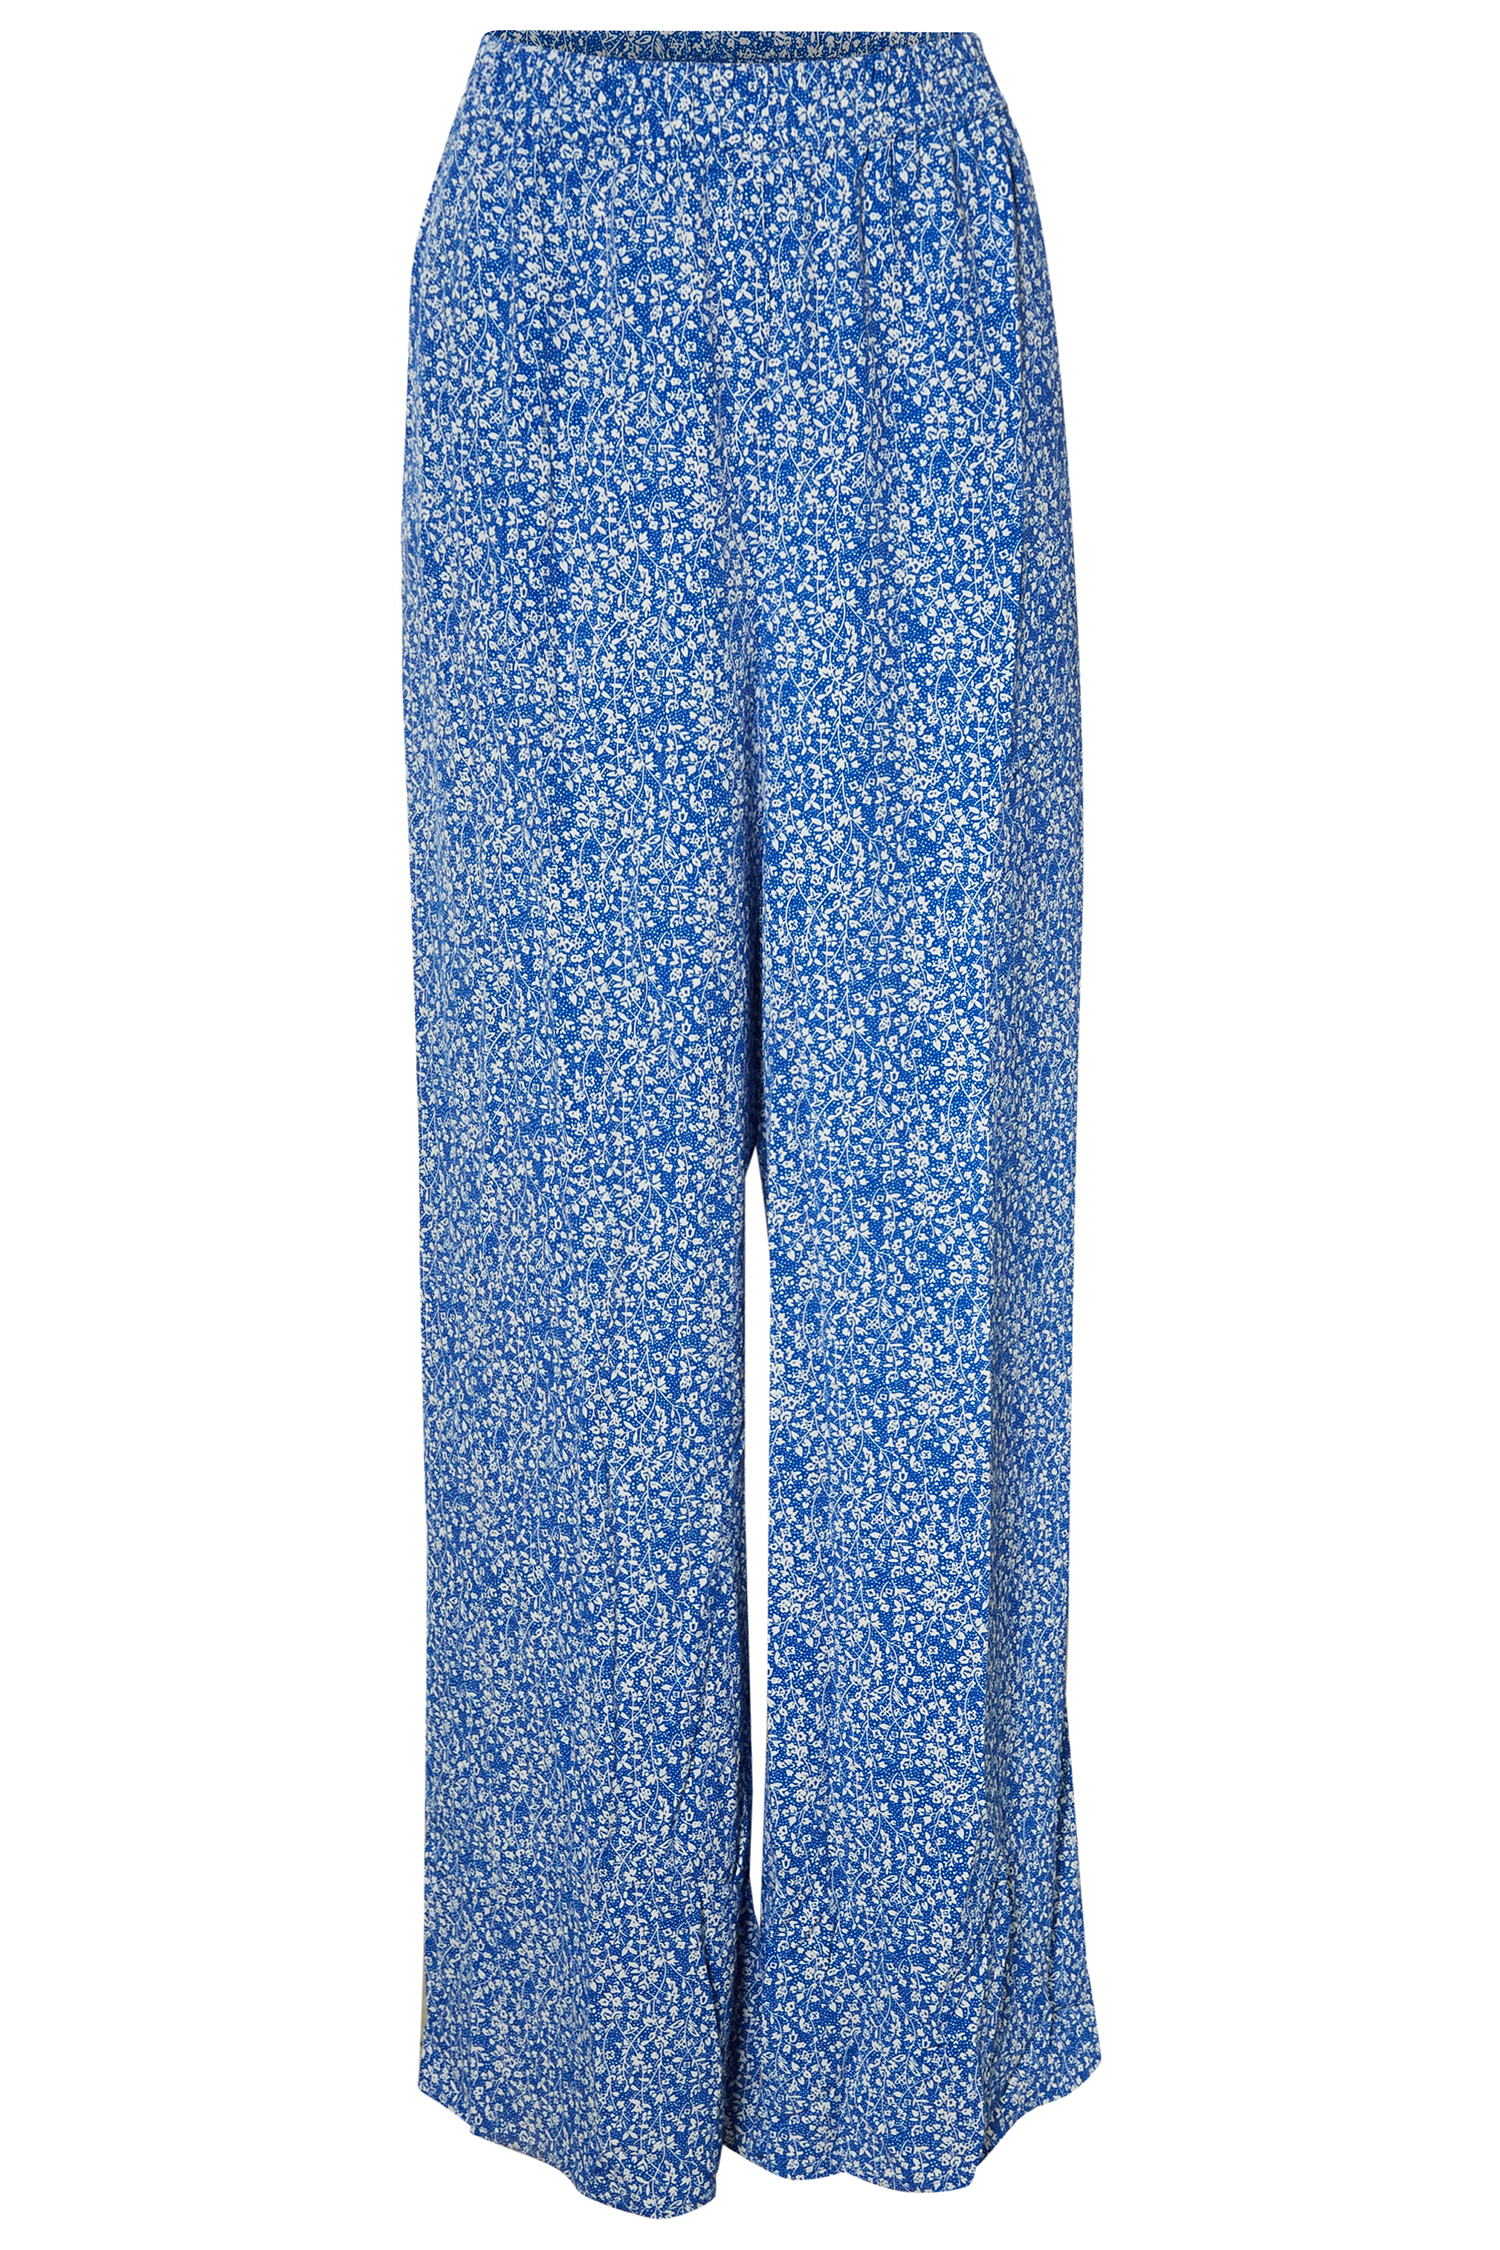 Skies Are Blue Floral Wide Leg Pant